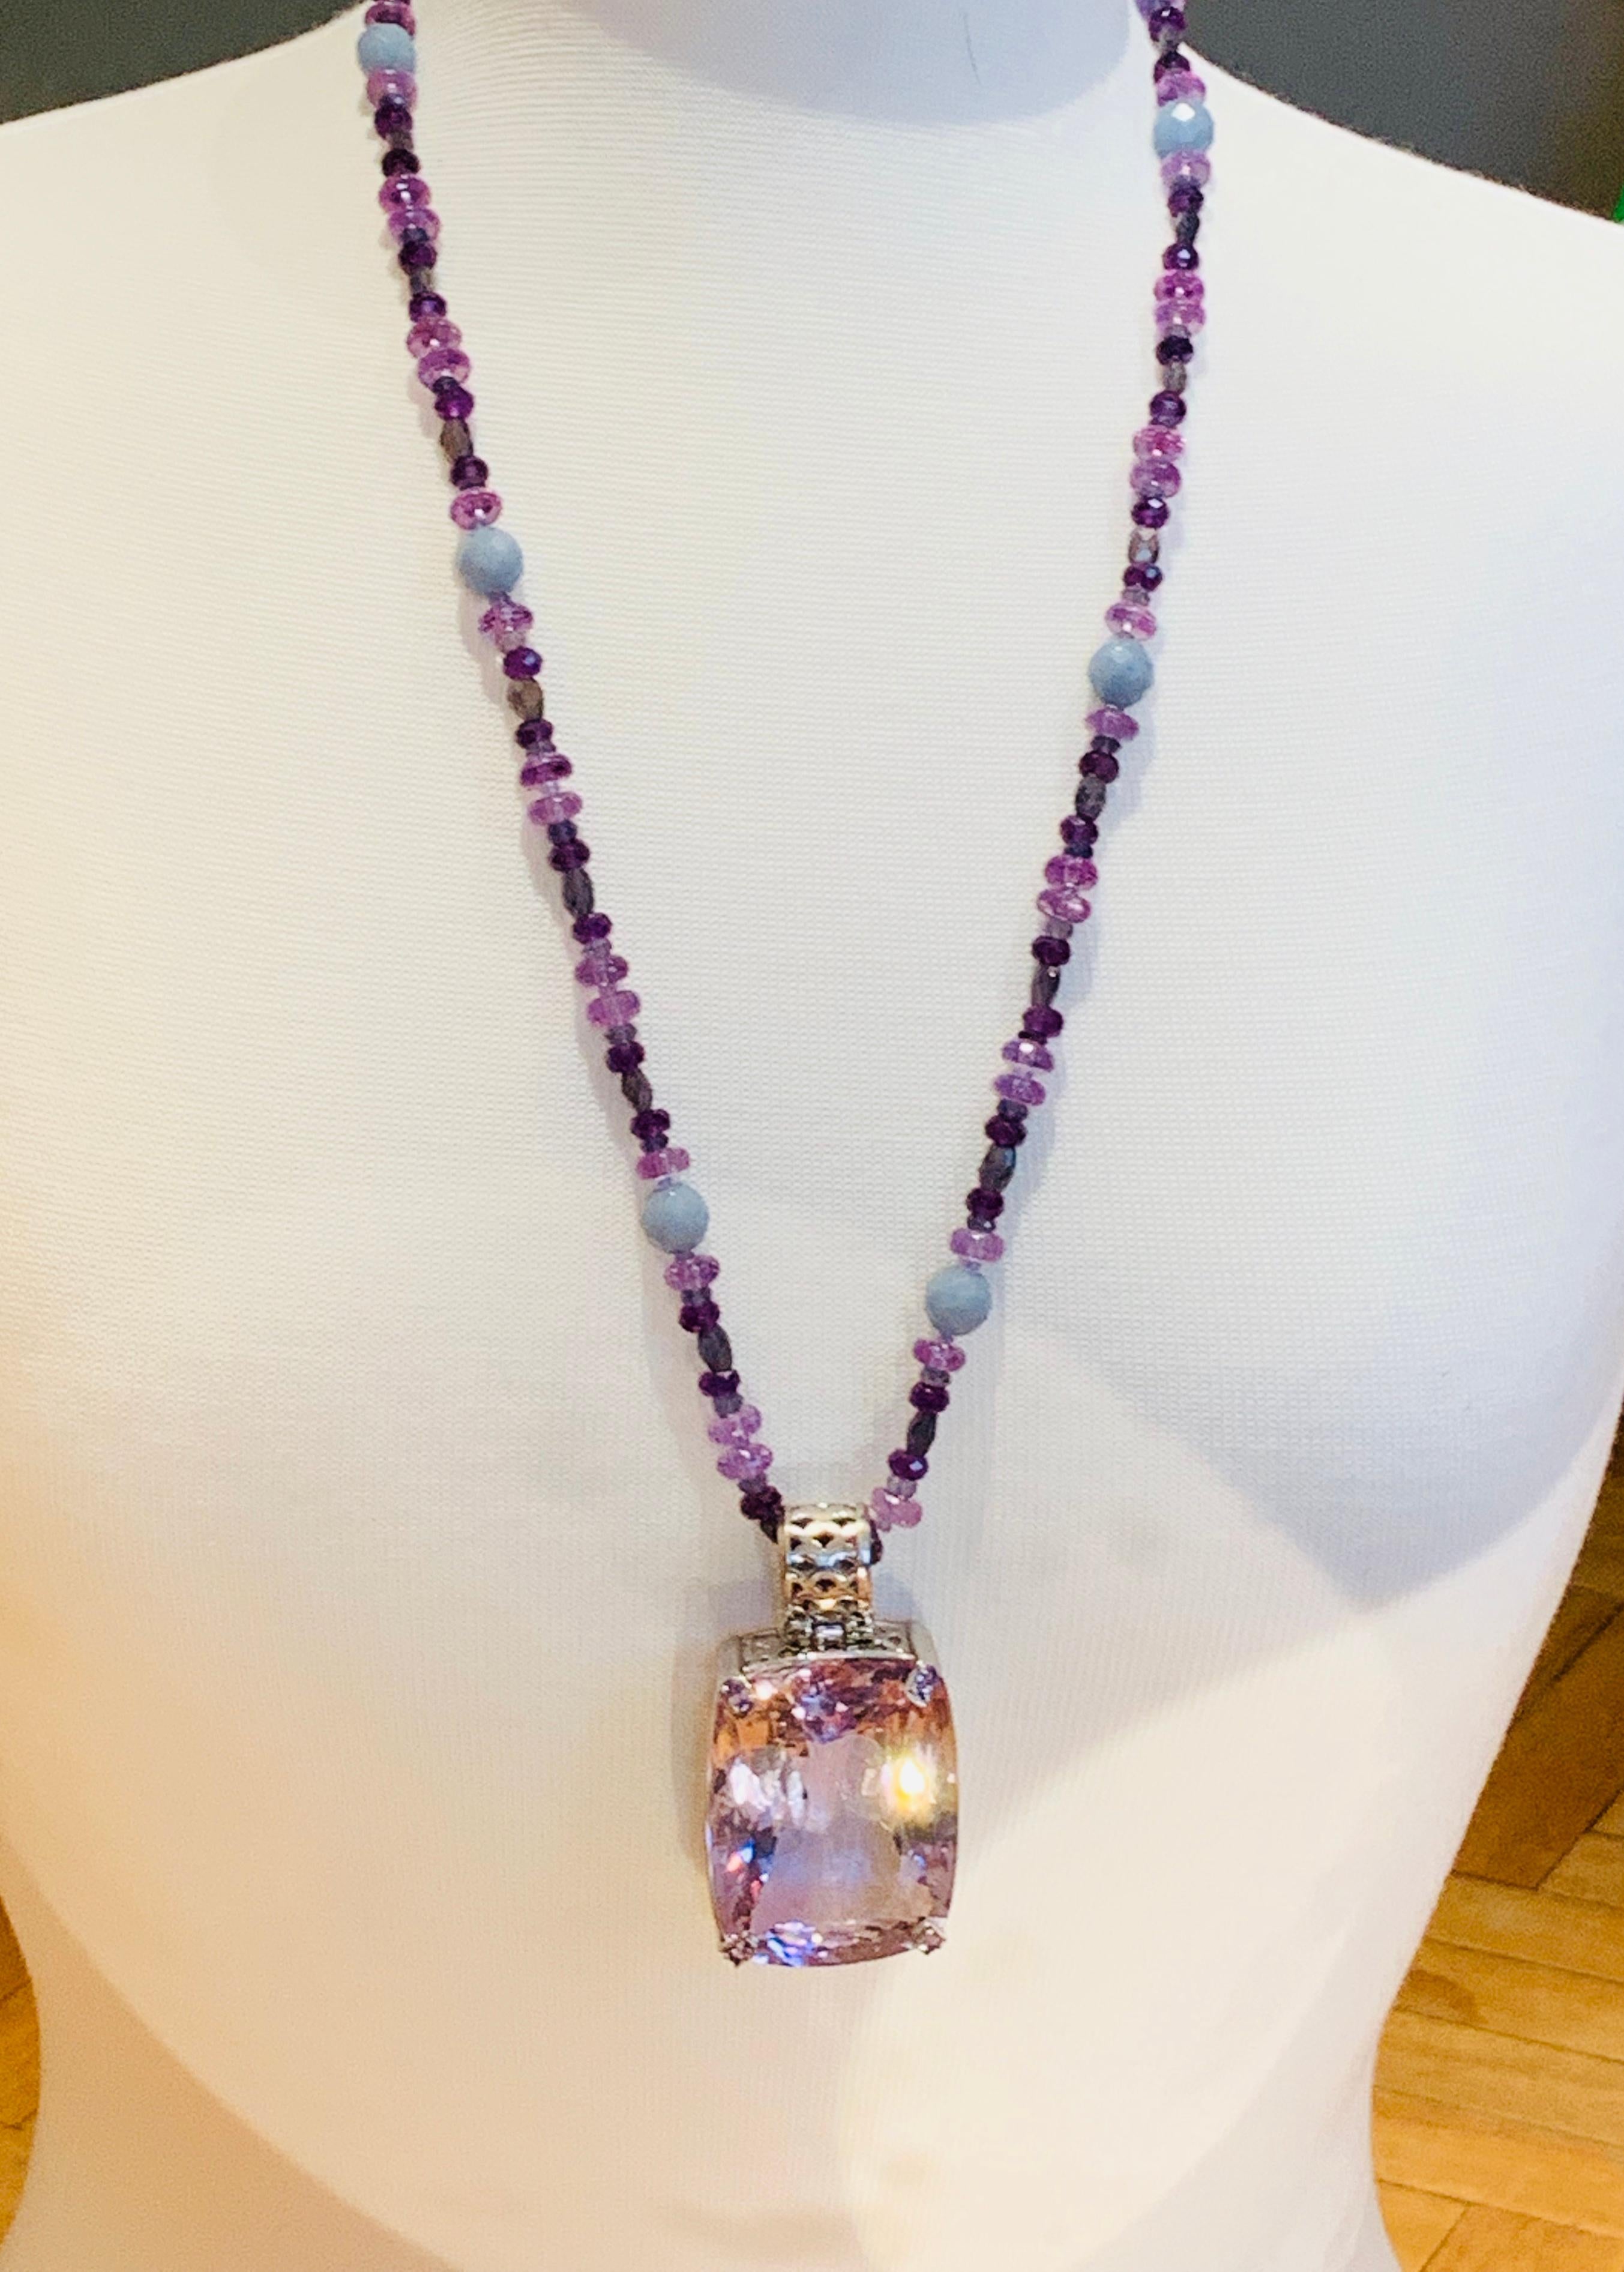 257.55 Carat Natural Brazilian Amethyst with Tanzanite Pendant Necklace For Sale 4